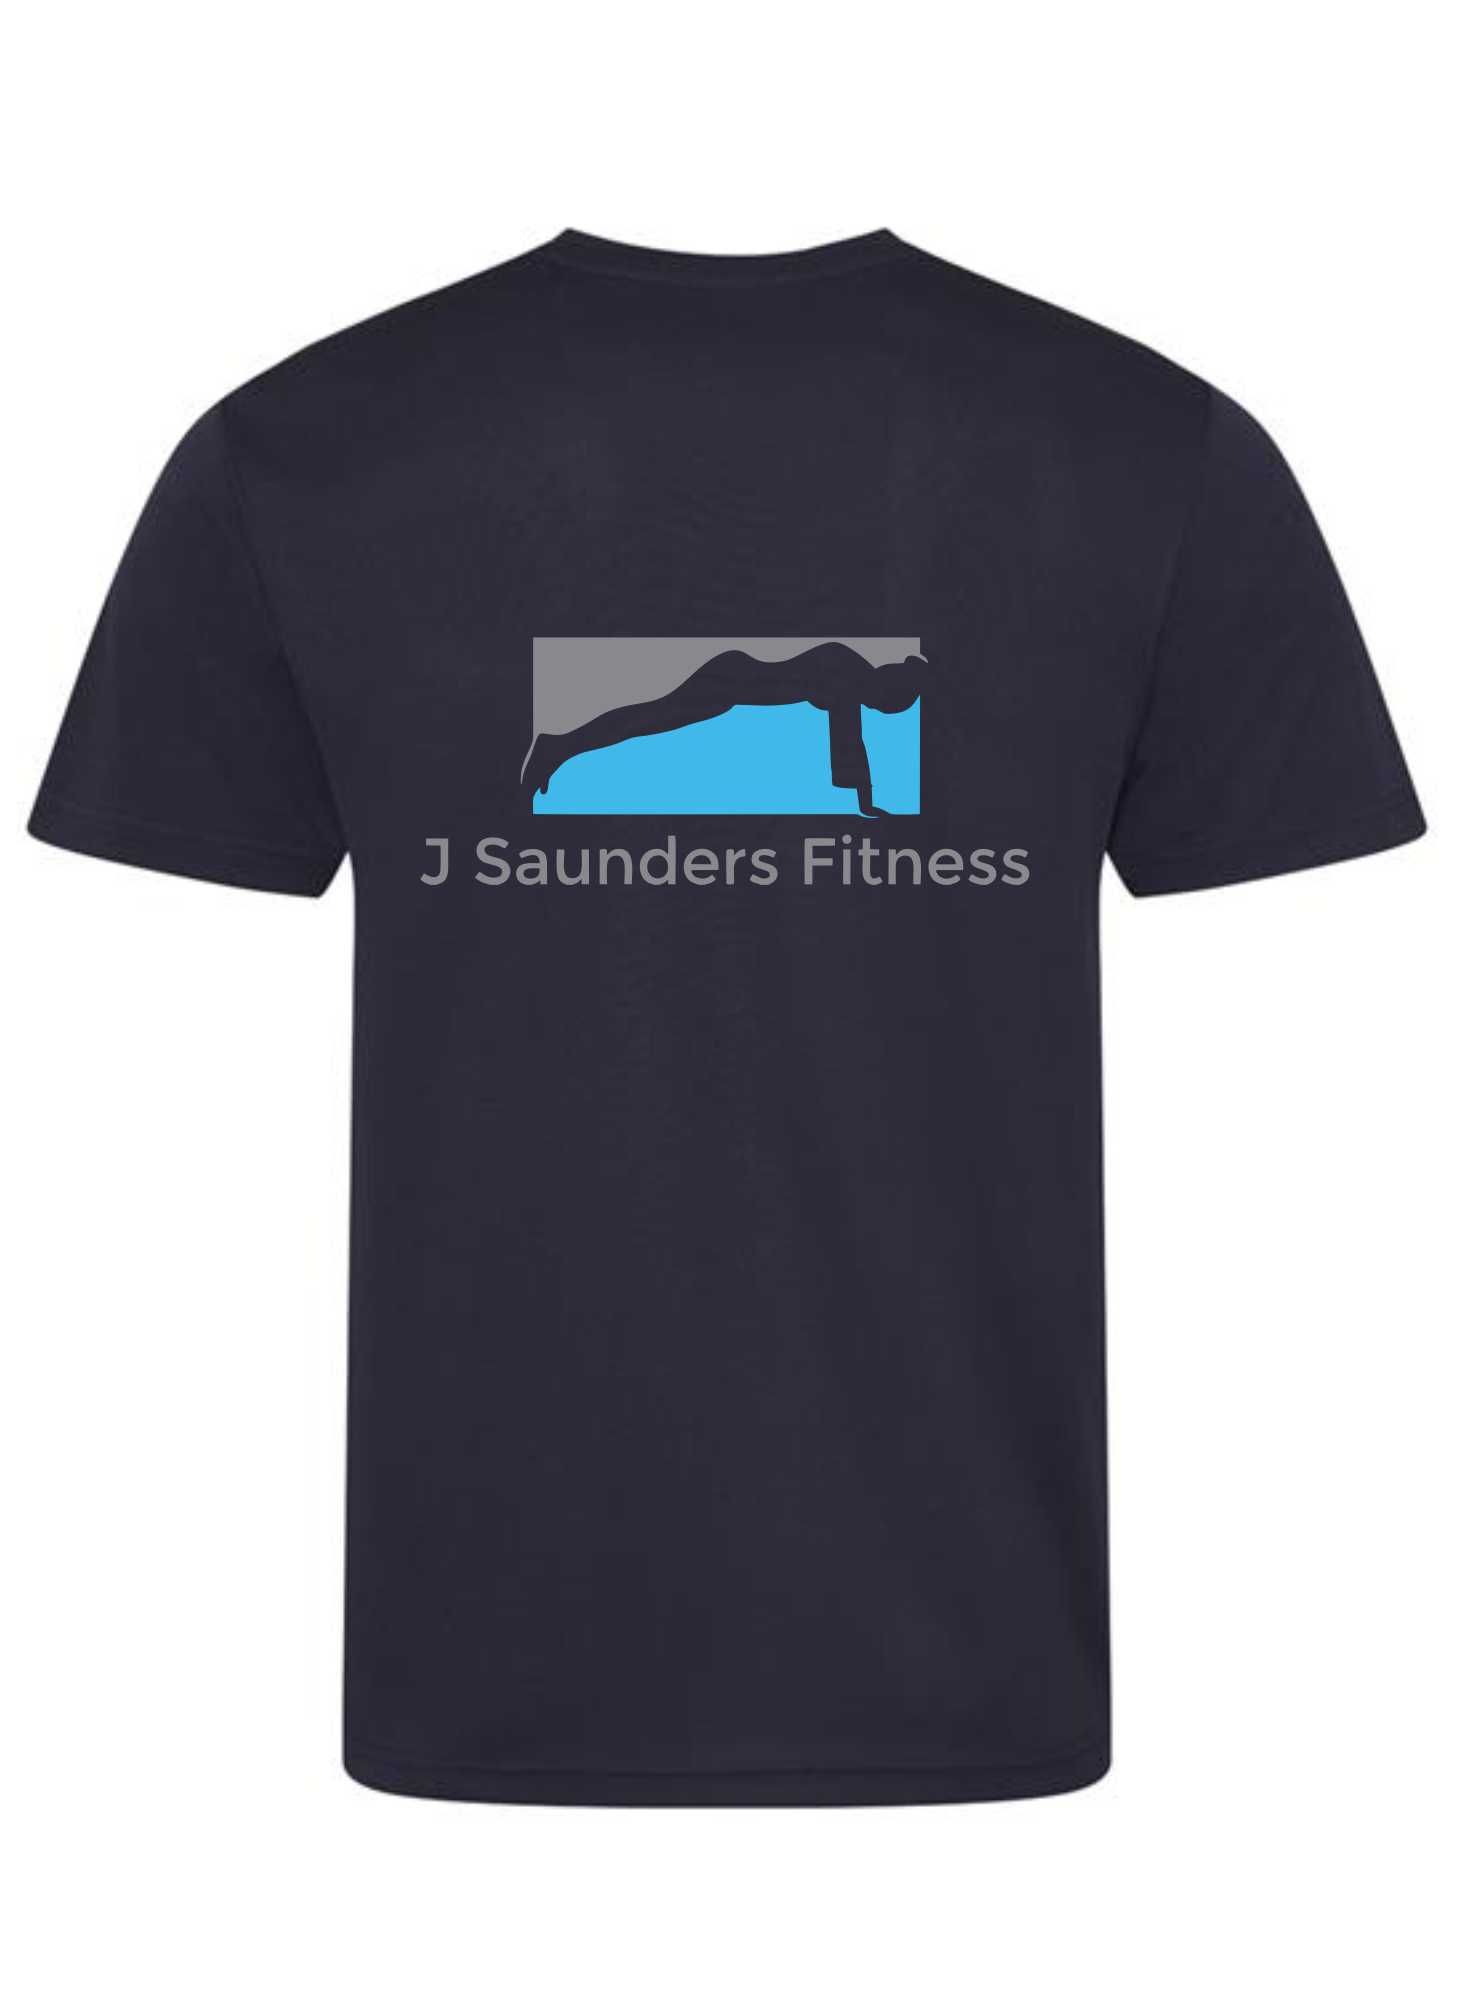 J Saunders Fitness- Ladies T-Shirt (Front & Back) 